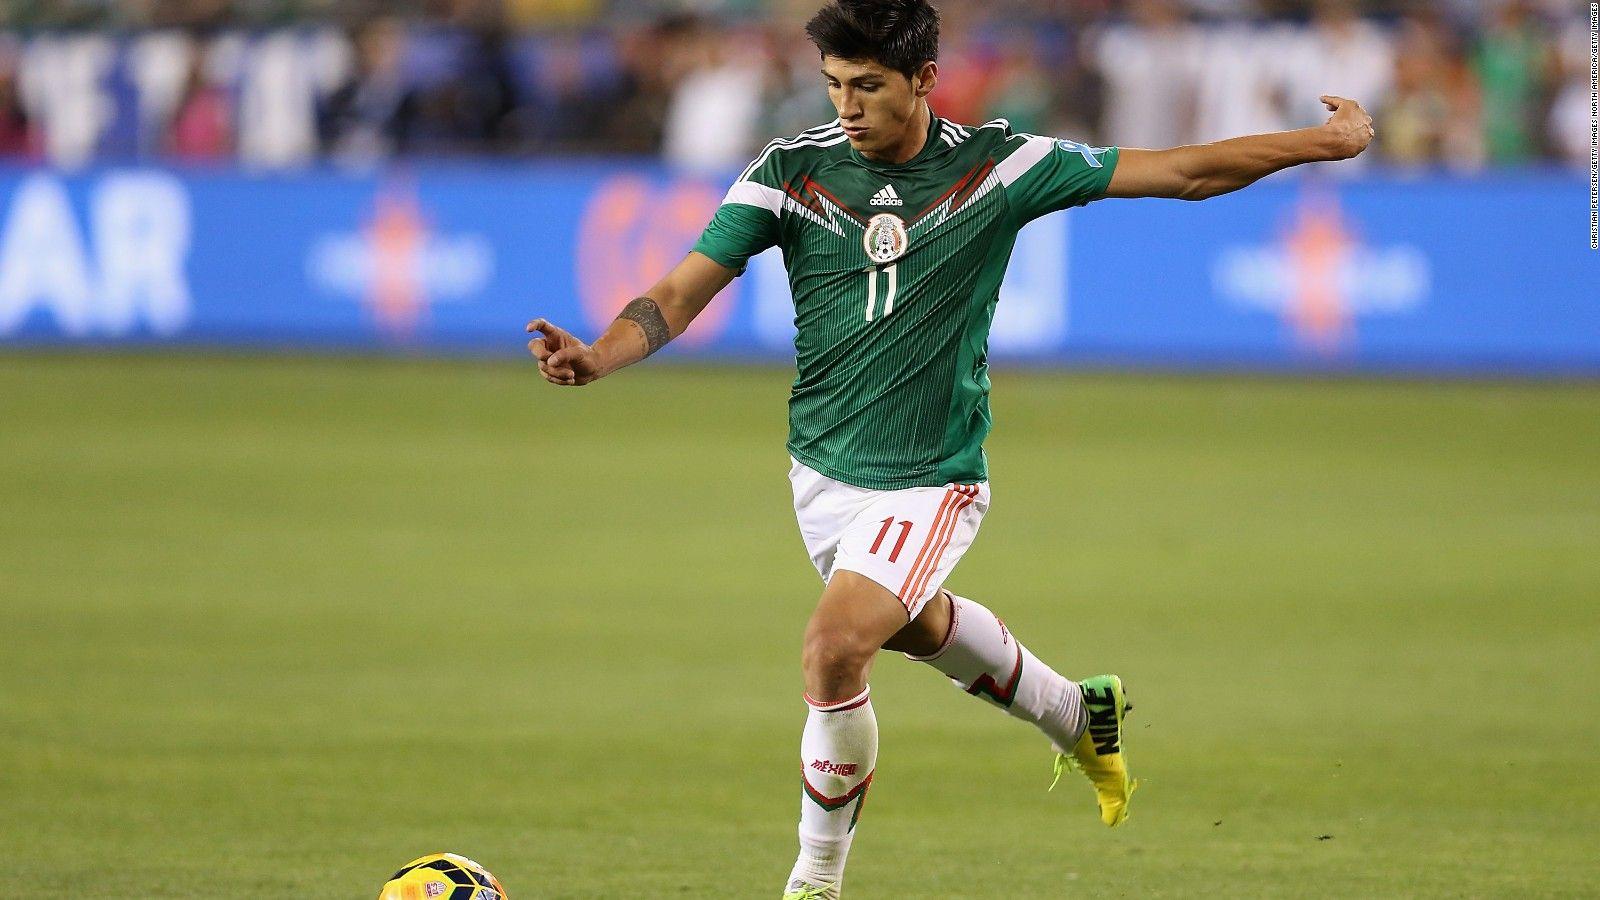 Alan Pulido, Mexican soccer player, rescued after kidnapping